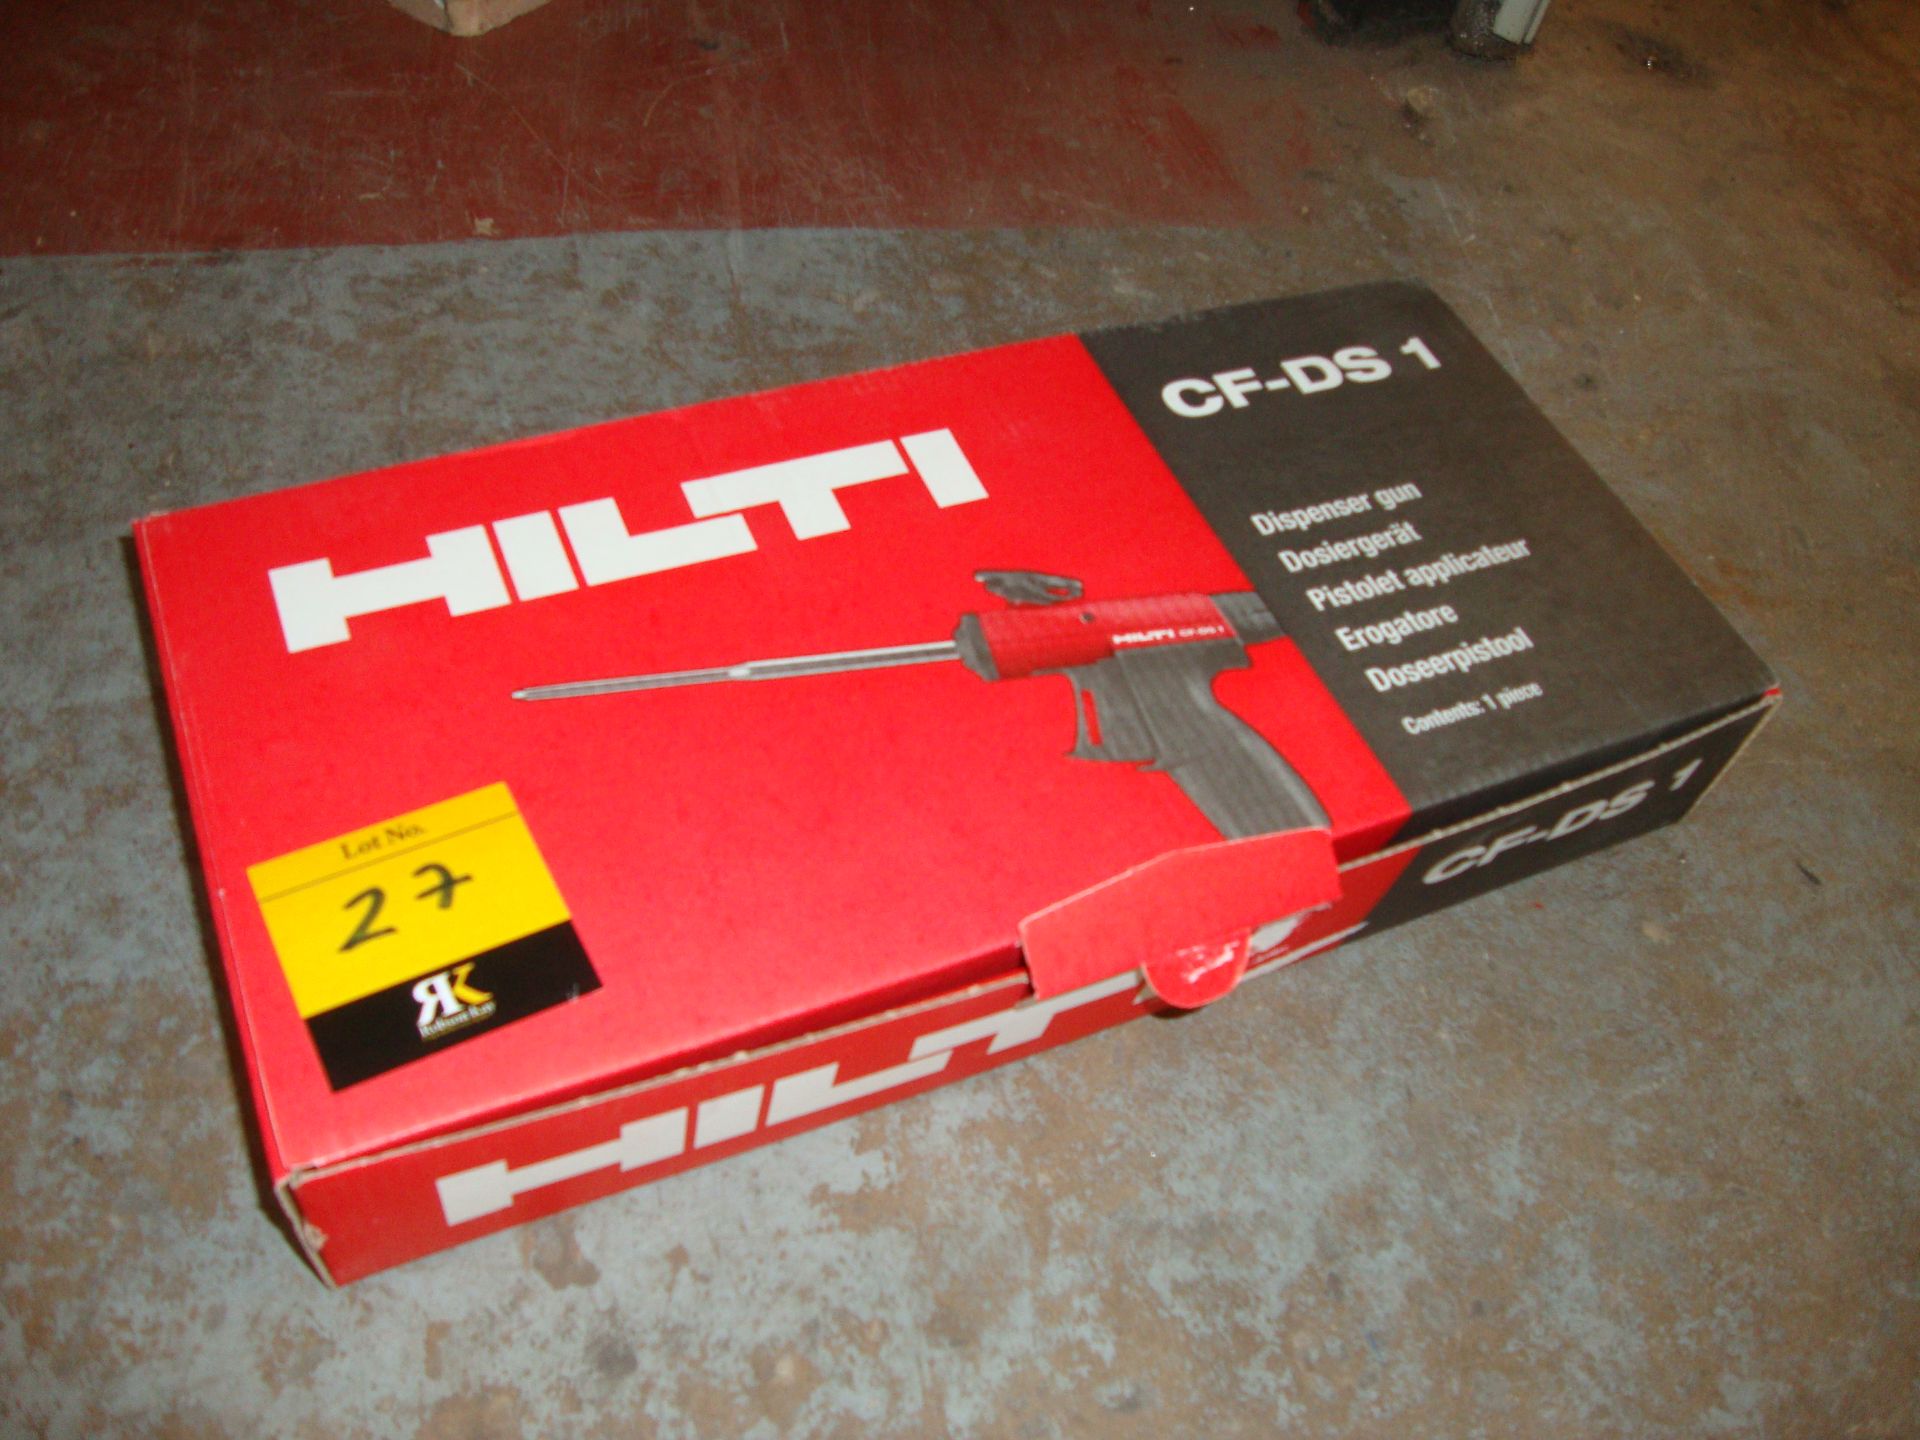 Hilti model CF-DS1 dispenser gun - appears unused. Includes box and instruction booklet/manual